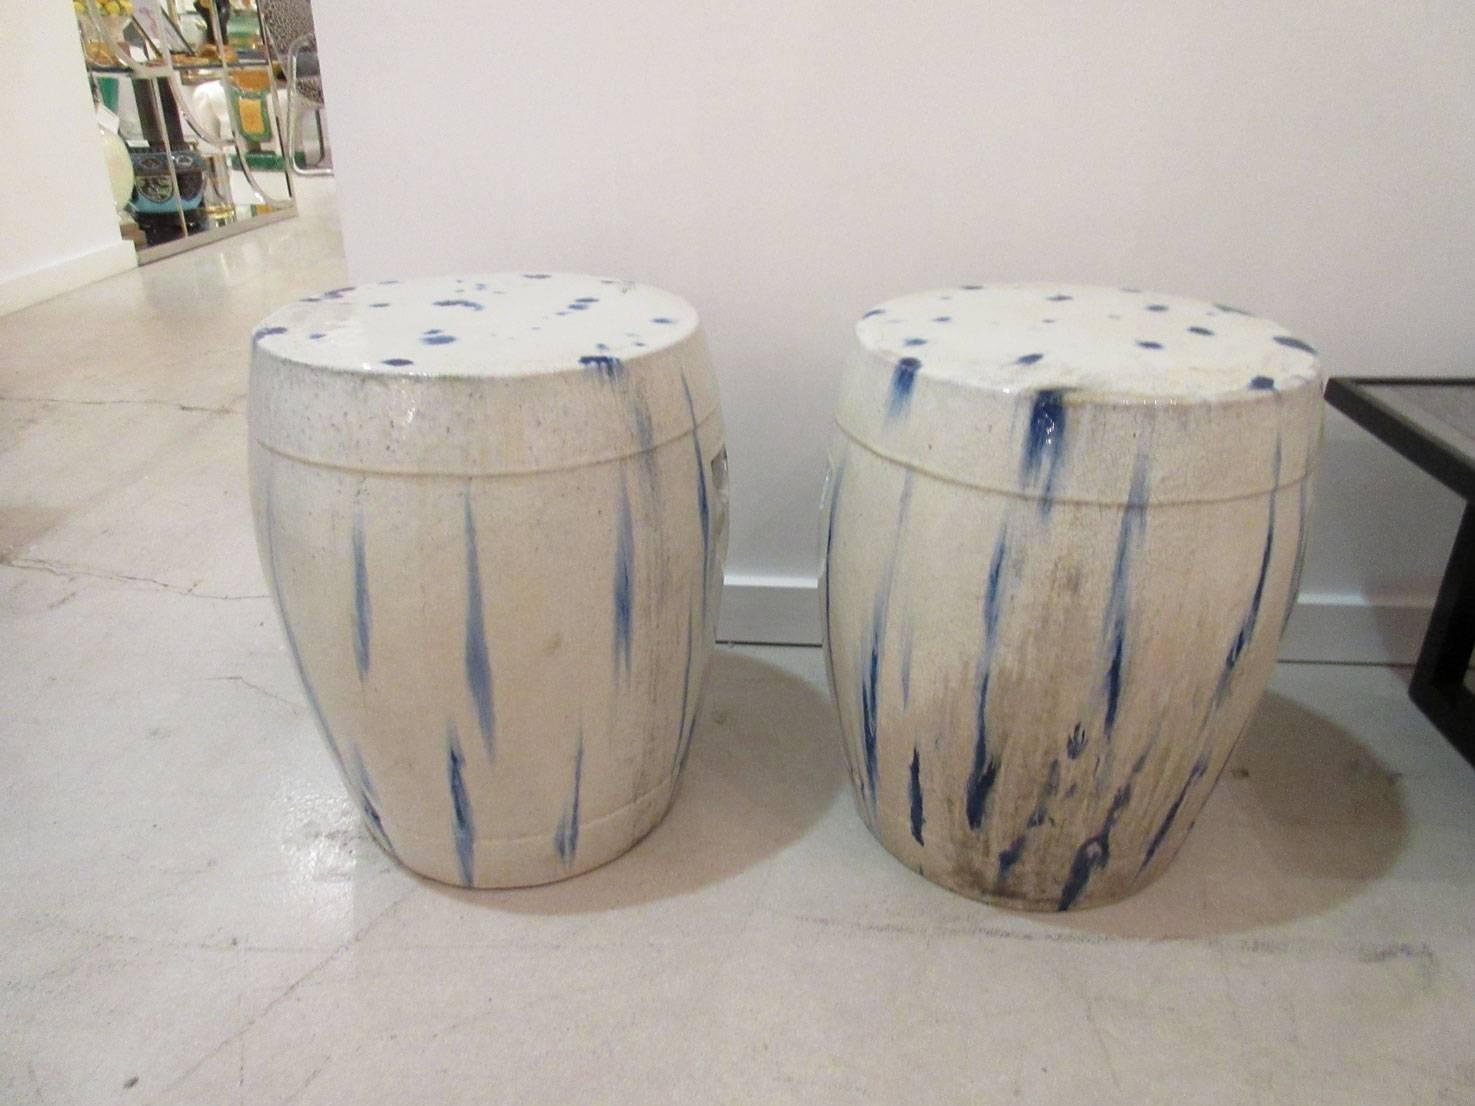 Pair of white Chinese ceramic garden seats with blue and green stain painting or tie-dye effect and fine surface craquelure.